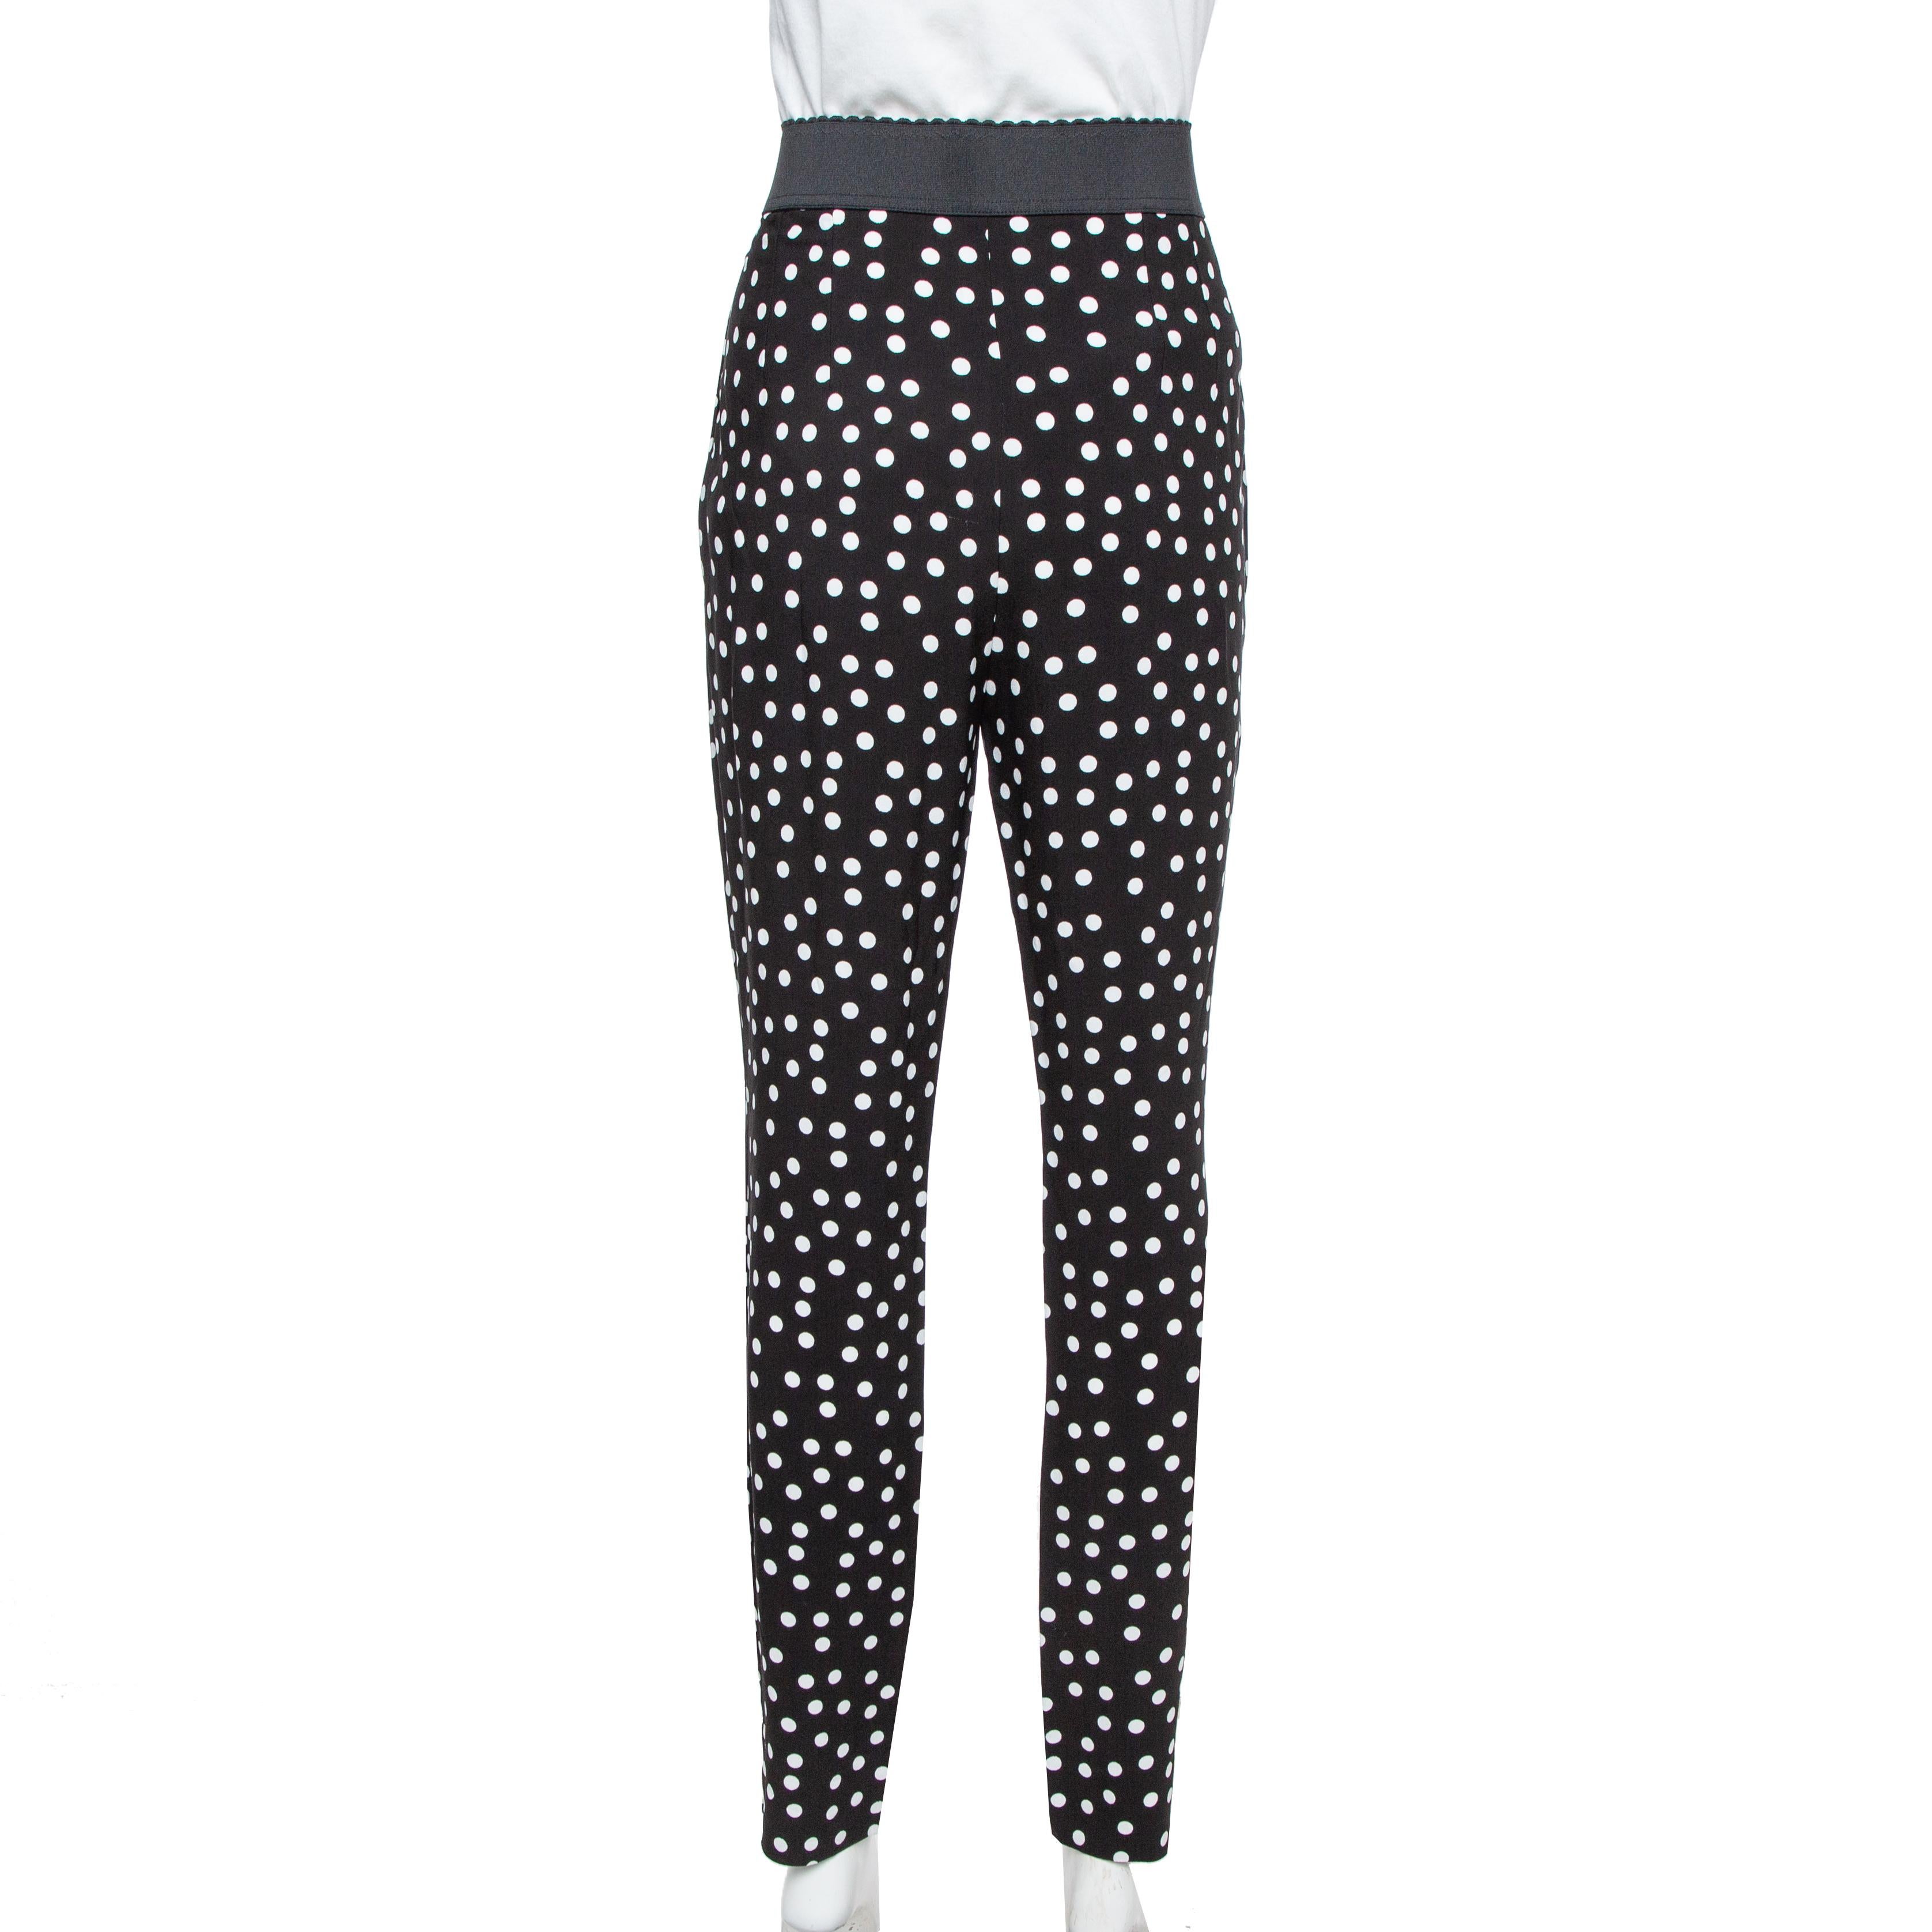 These Dolce & Gabbana's trousers are cut from crepe in a black hue and decorated with white polka-dots. They are designed with an elasticated band that sits high on your waist and fits slim through the leg. Wear them with the coordinating blouse for